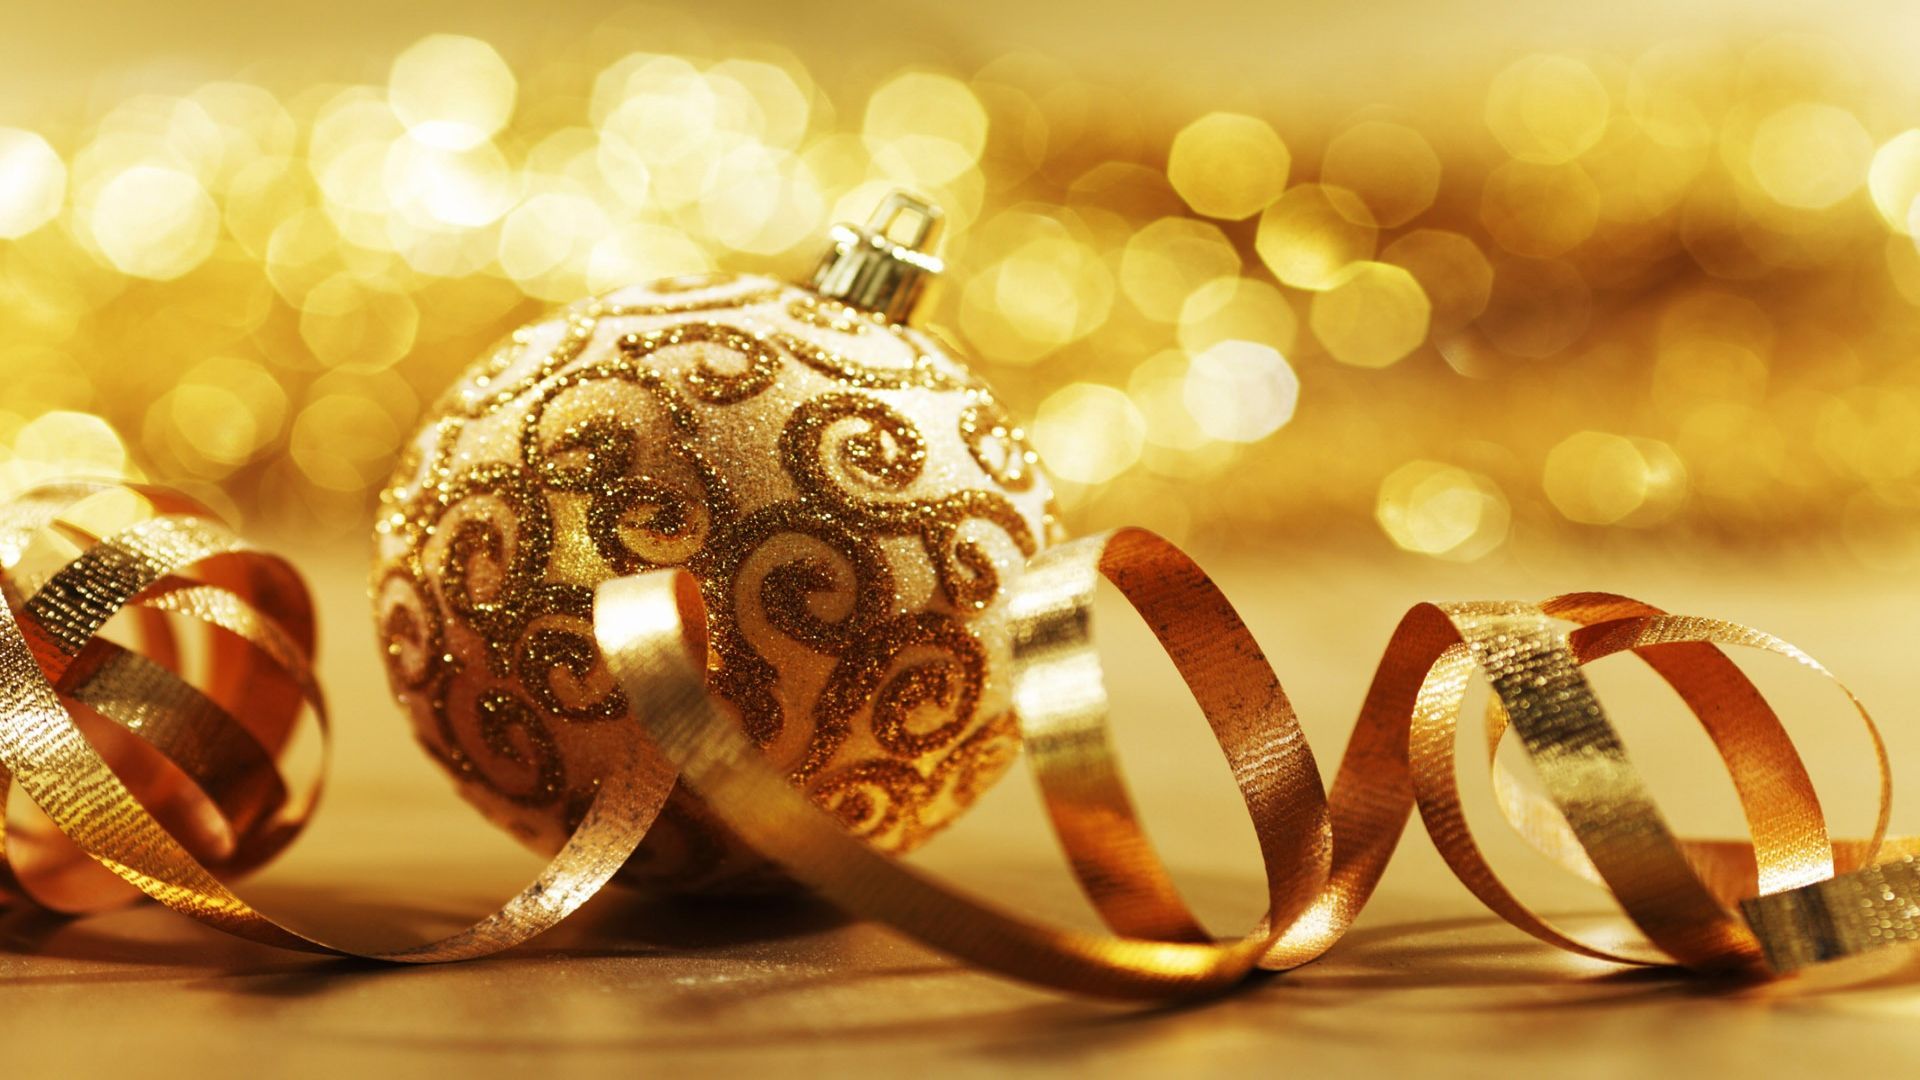 Christmas Decorations download free wallpapers for pc in hd